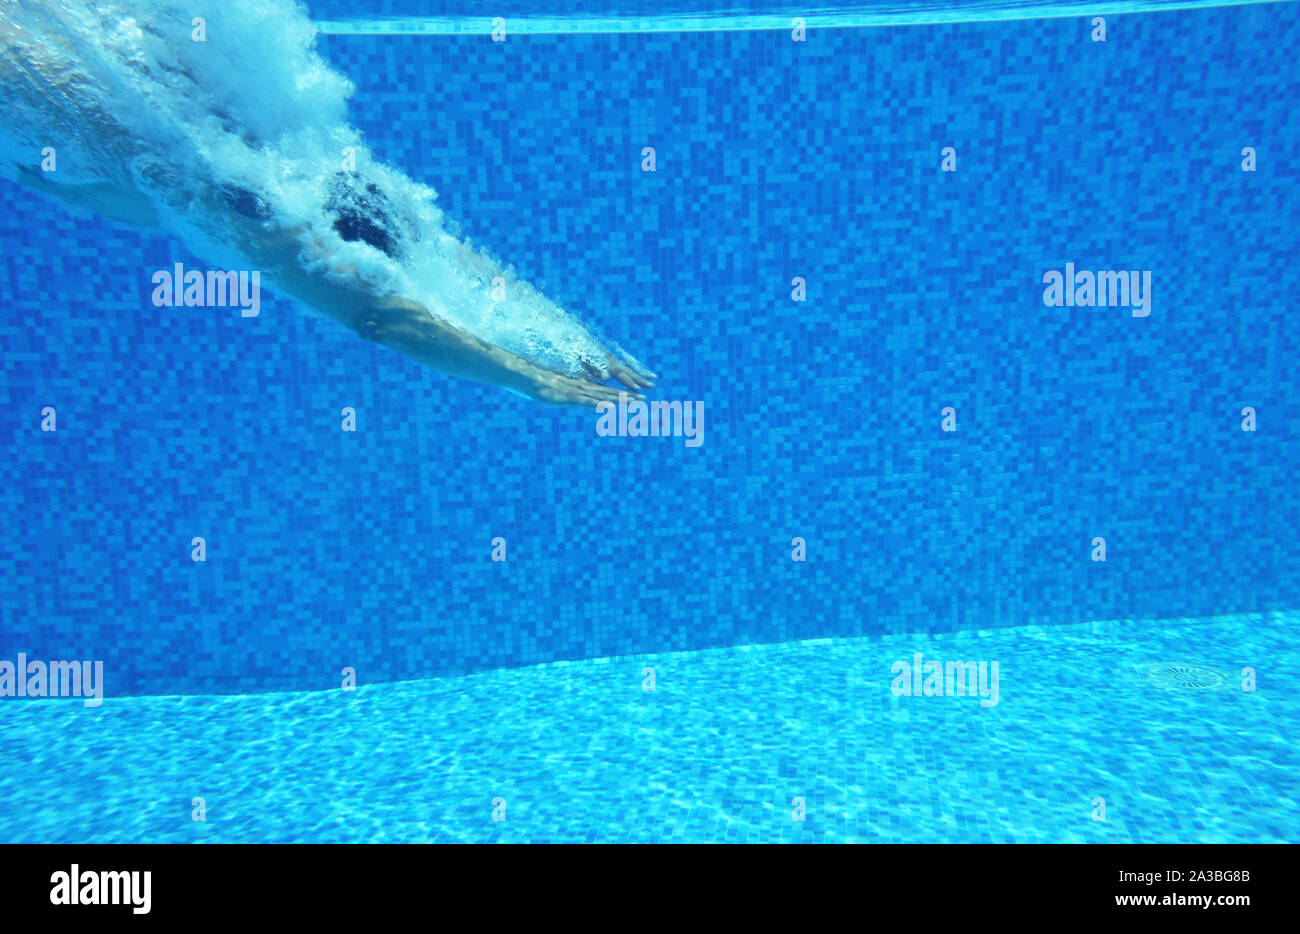 Underwater shot of man diving into pool Stock Photo